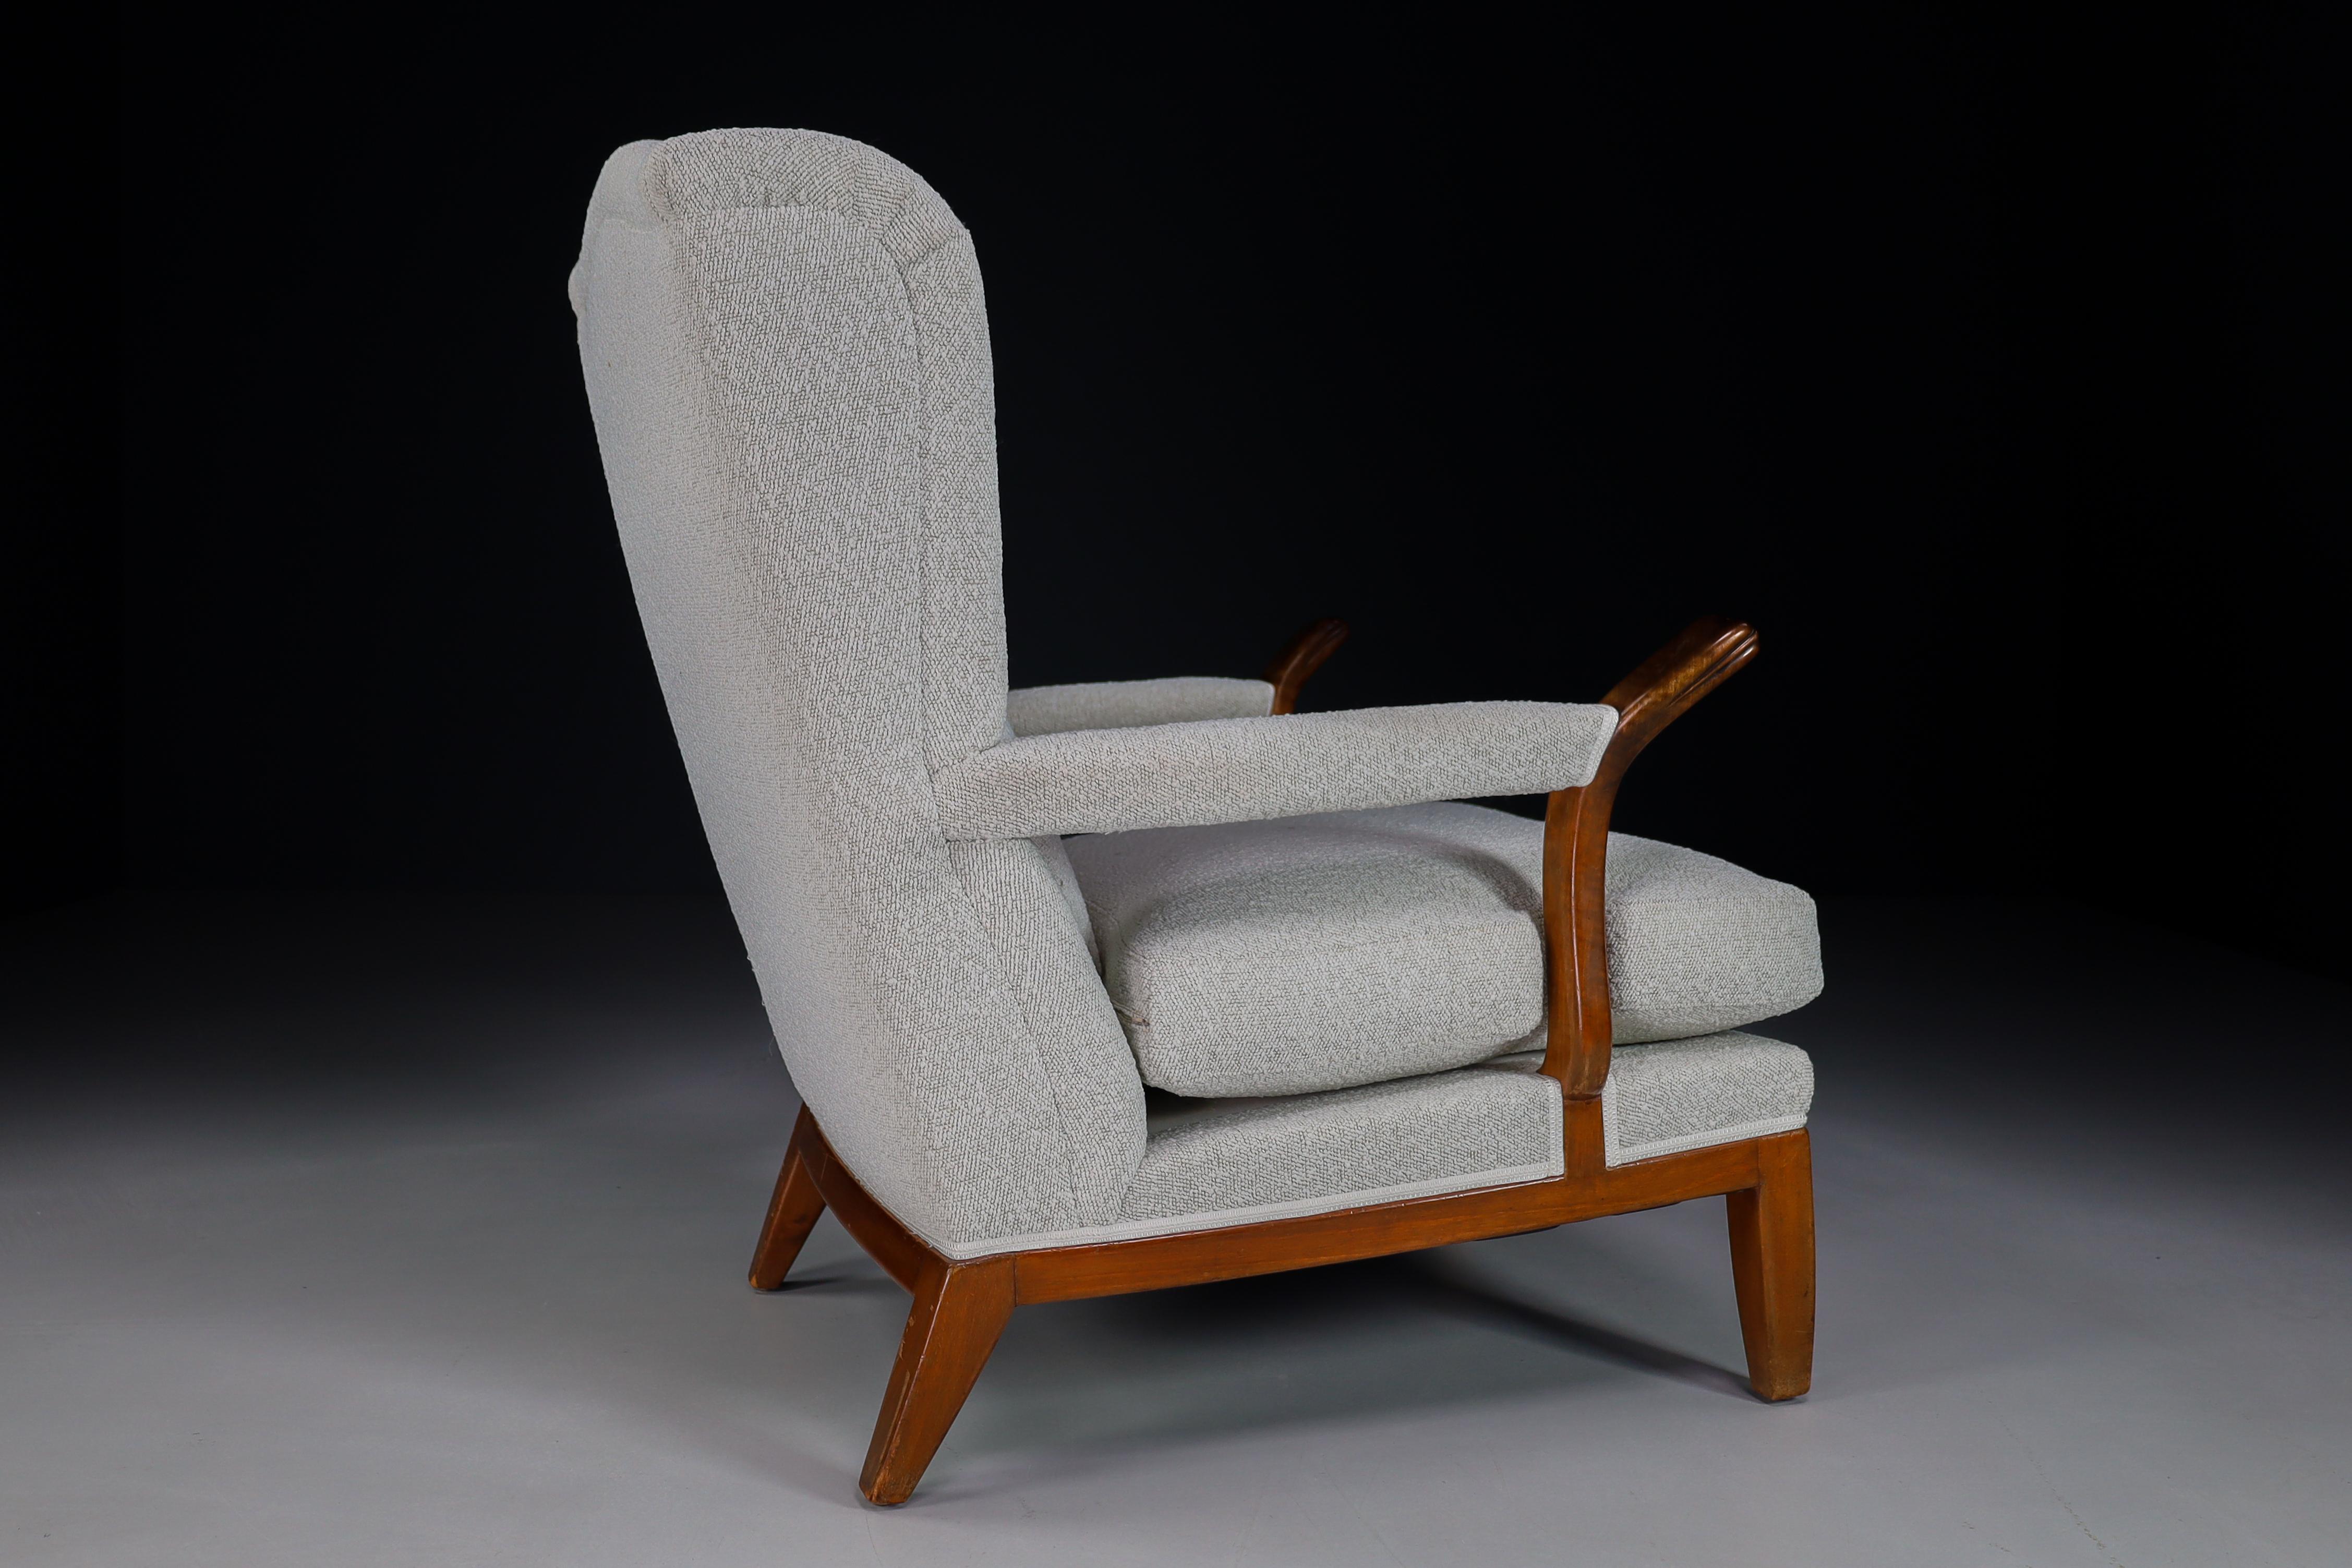 Large Wingback Chair in Walnut and New Bouclé Fabric, France, 1930s For Sale 5